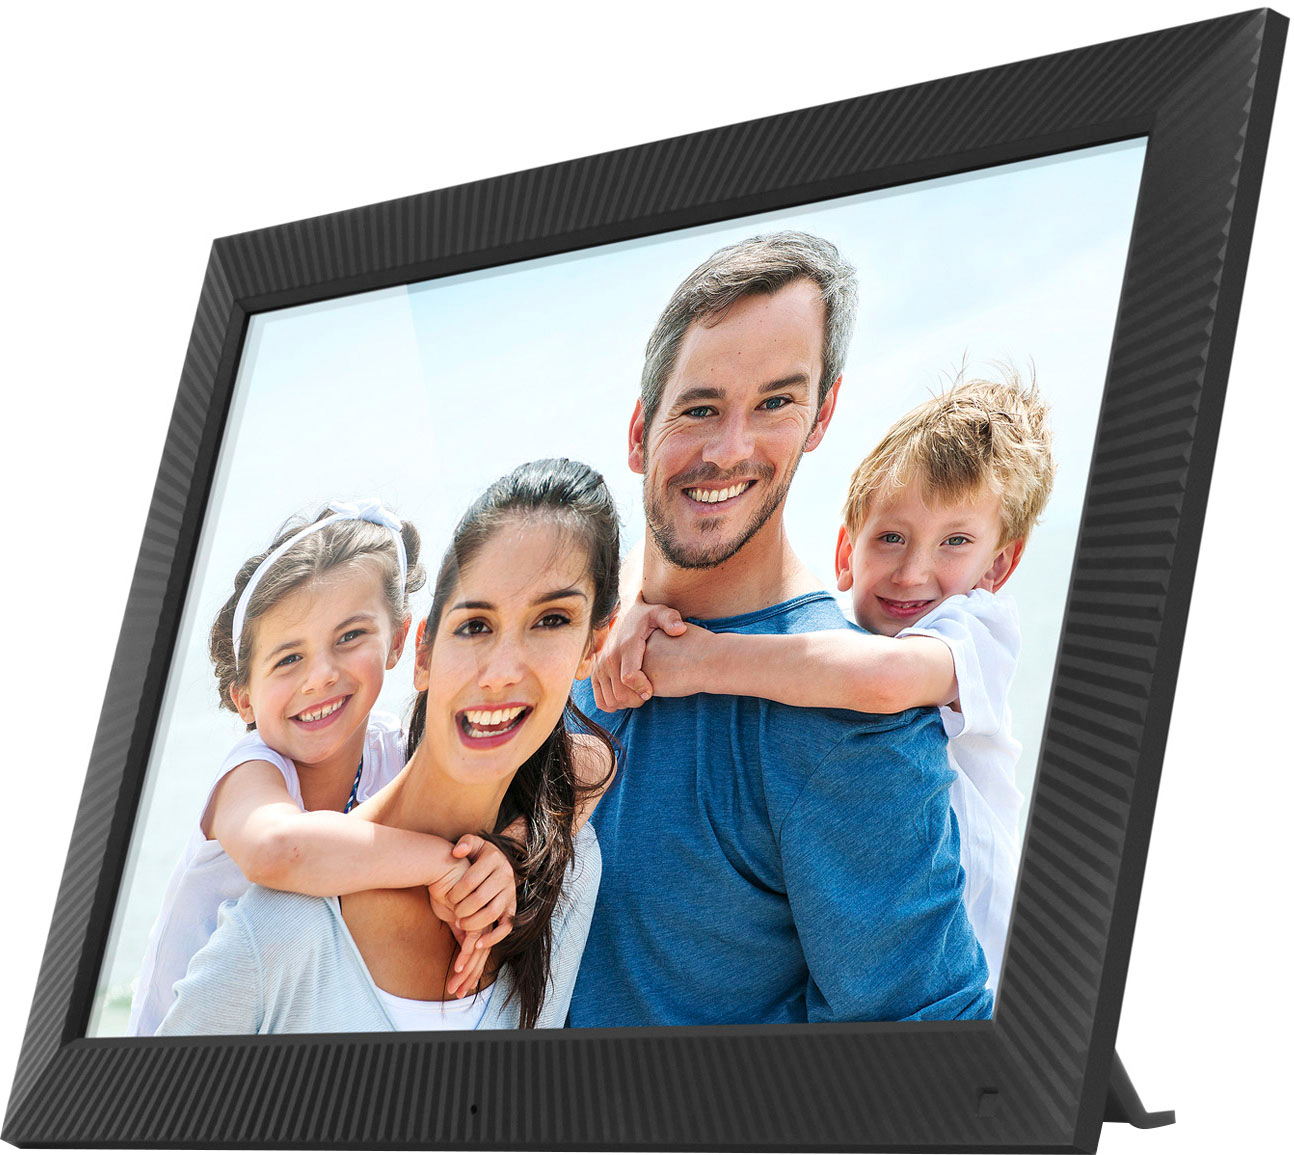 Pix-Star 15 inch WiFi Digital Picture Frame, Share Videos and Photos Instantly by Email or App, Motion Sensor, IPS Display, Effortless One Minute Setu - 4